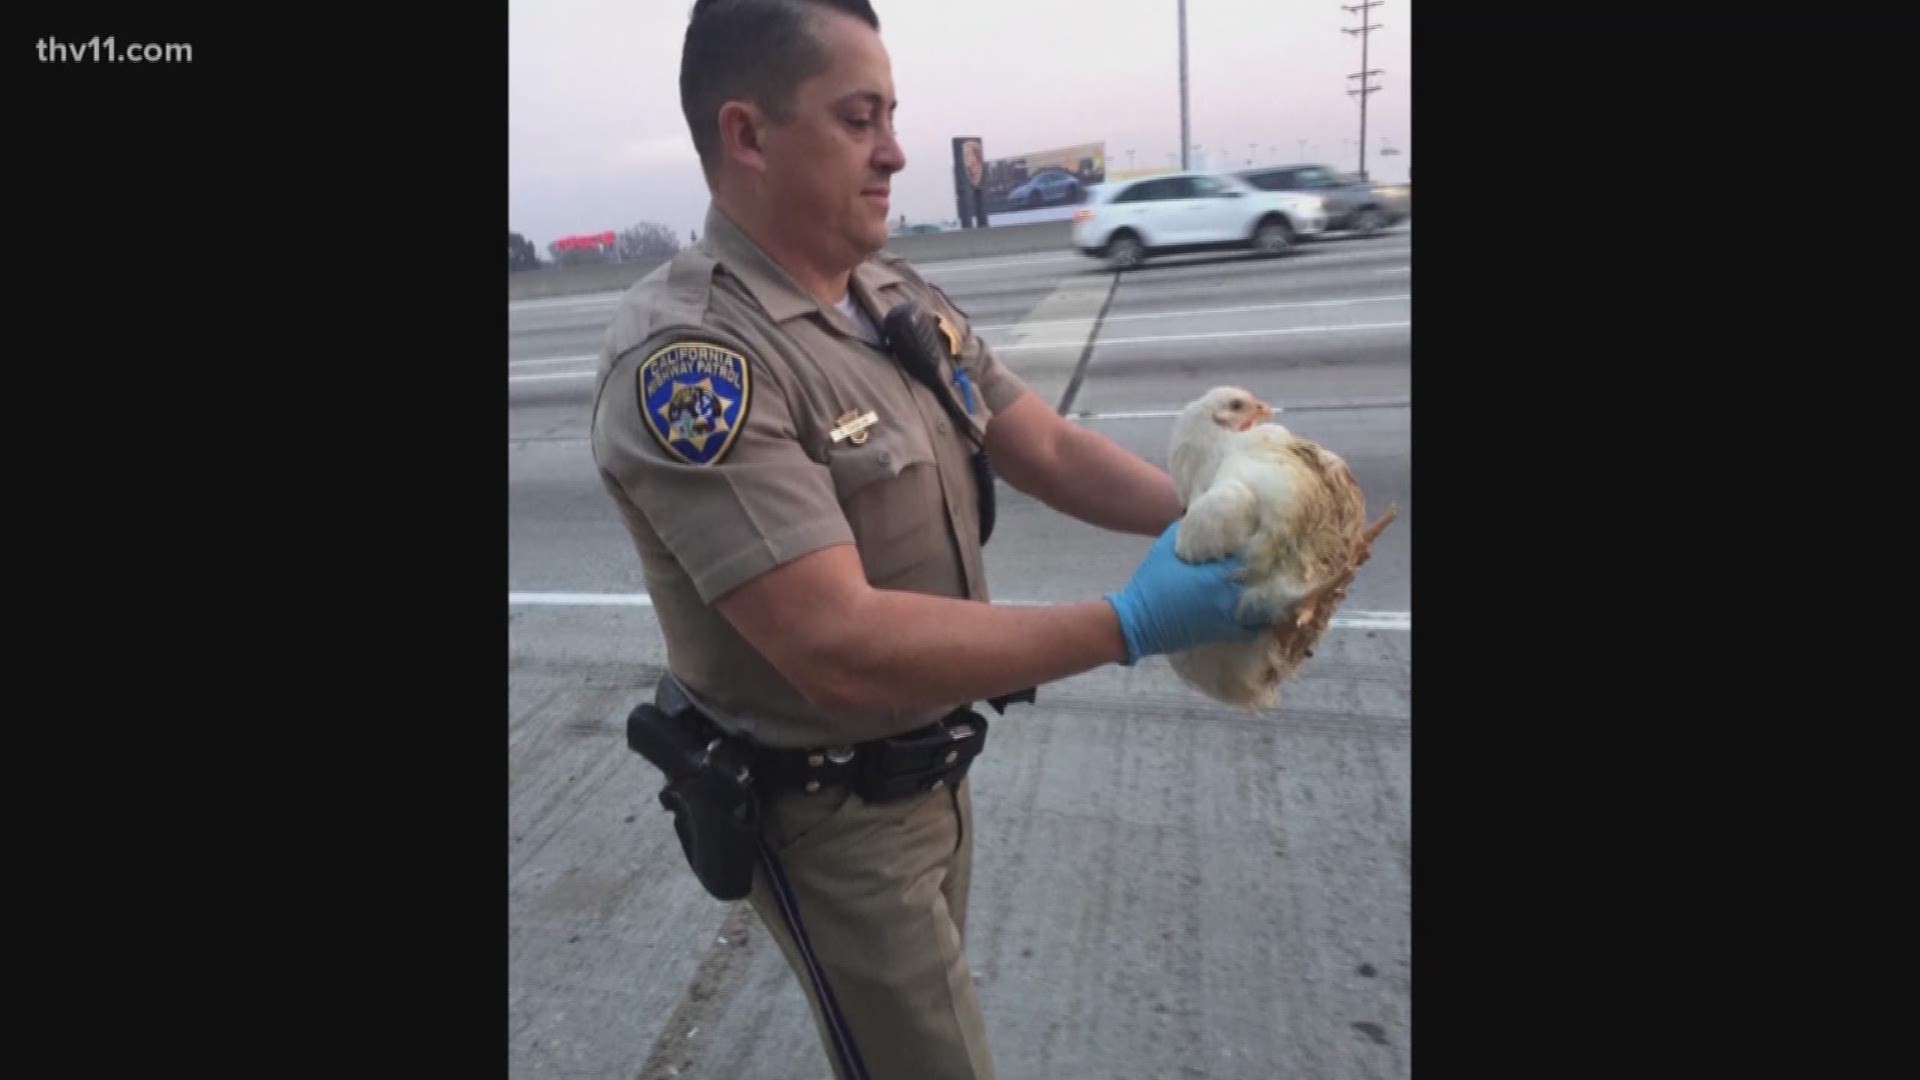 California Highway Patrol had an unusual assignment on Tuesday after they had to rescue nearly 20 chickens on a busy interstate.